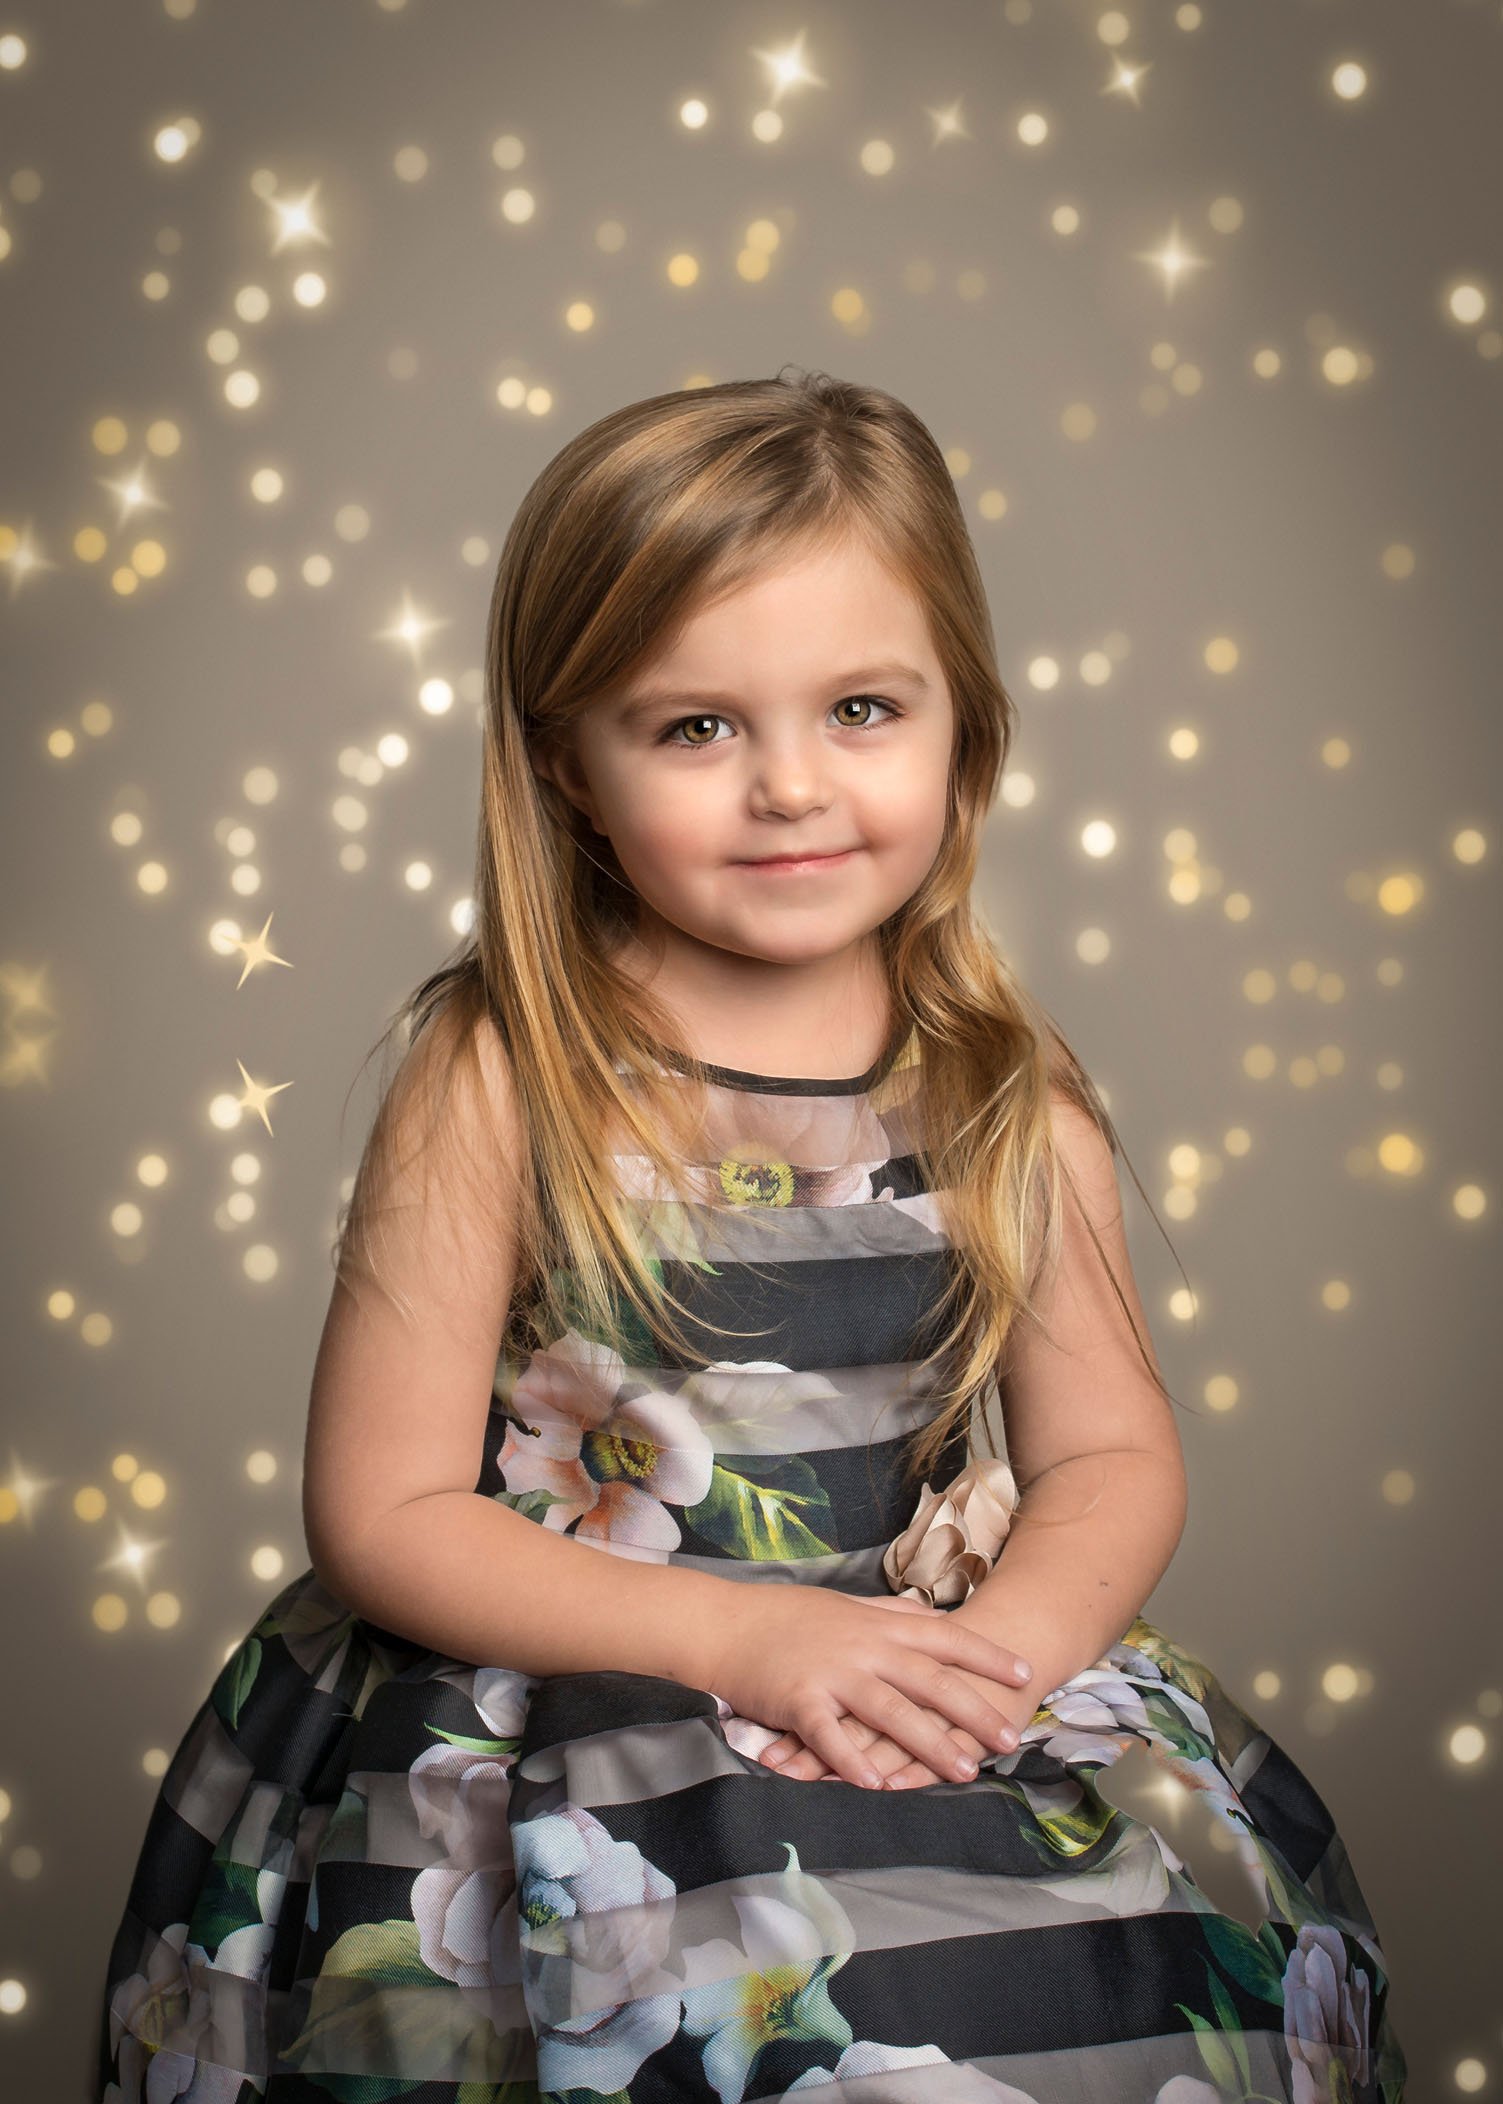 3 year old girl sitting in pretty dress with bokeh lights